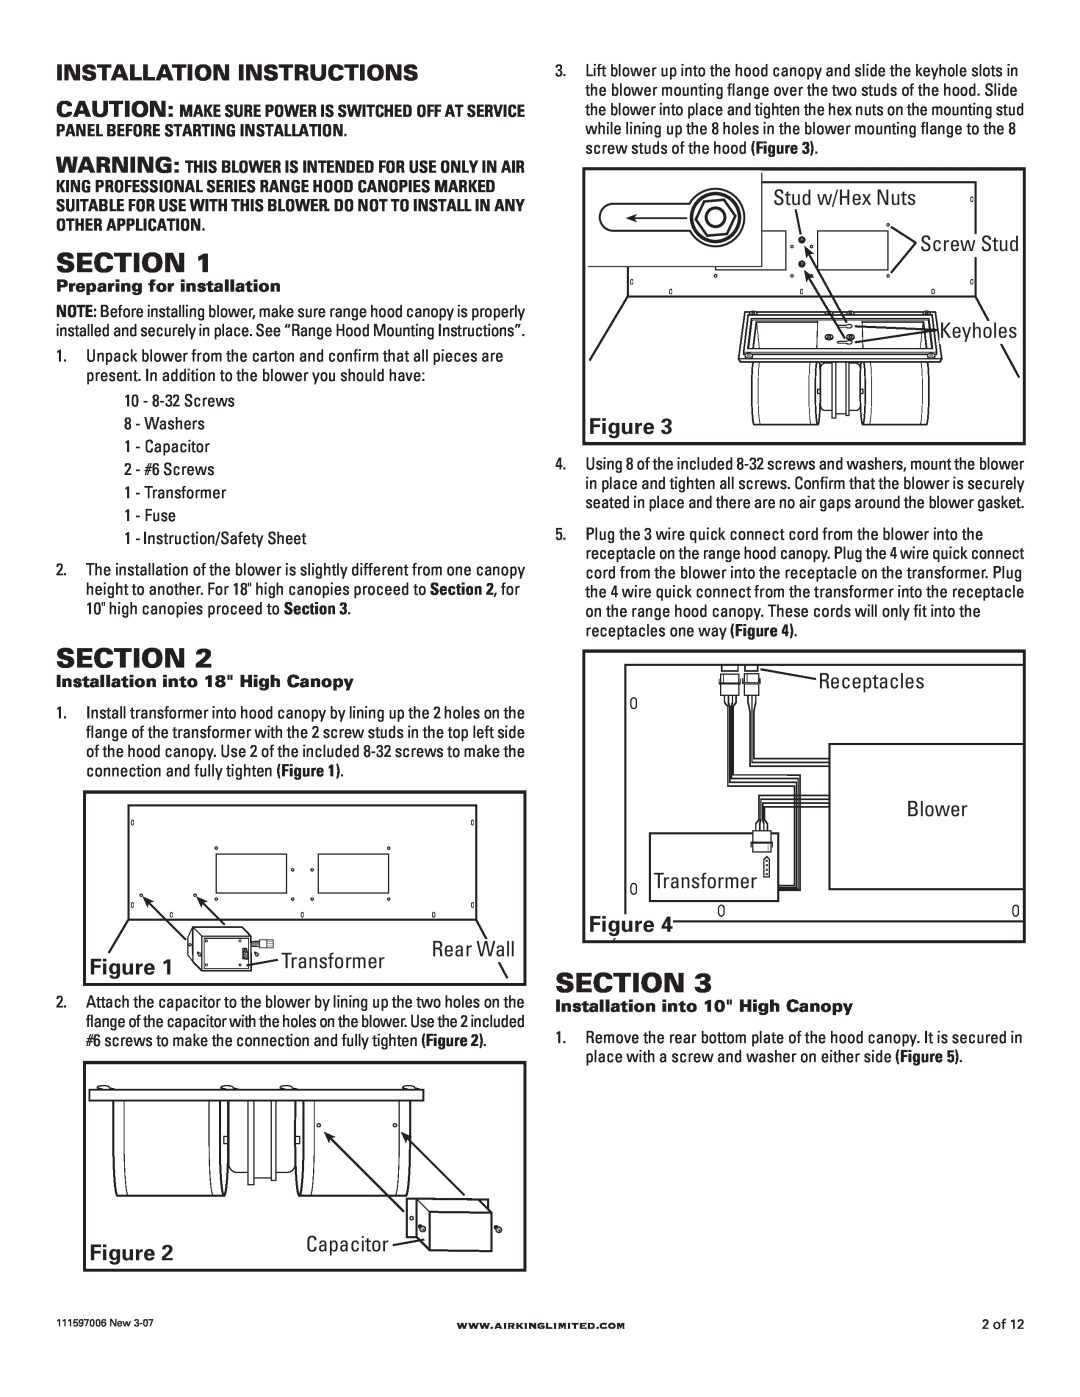 Air King B900 Section, Installation Instructions, Stud w/Hex Nuts, Transformer, Receptacles, Capacitor, Keyholes, Blower 